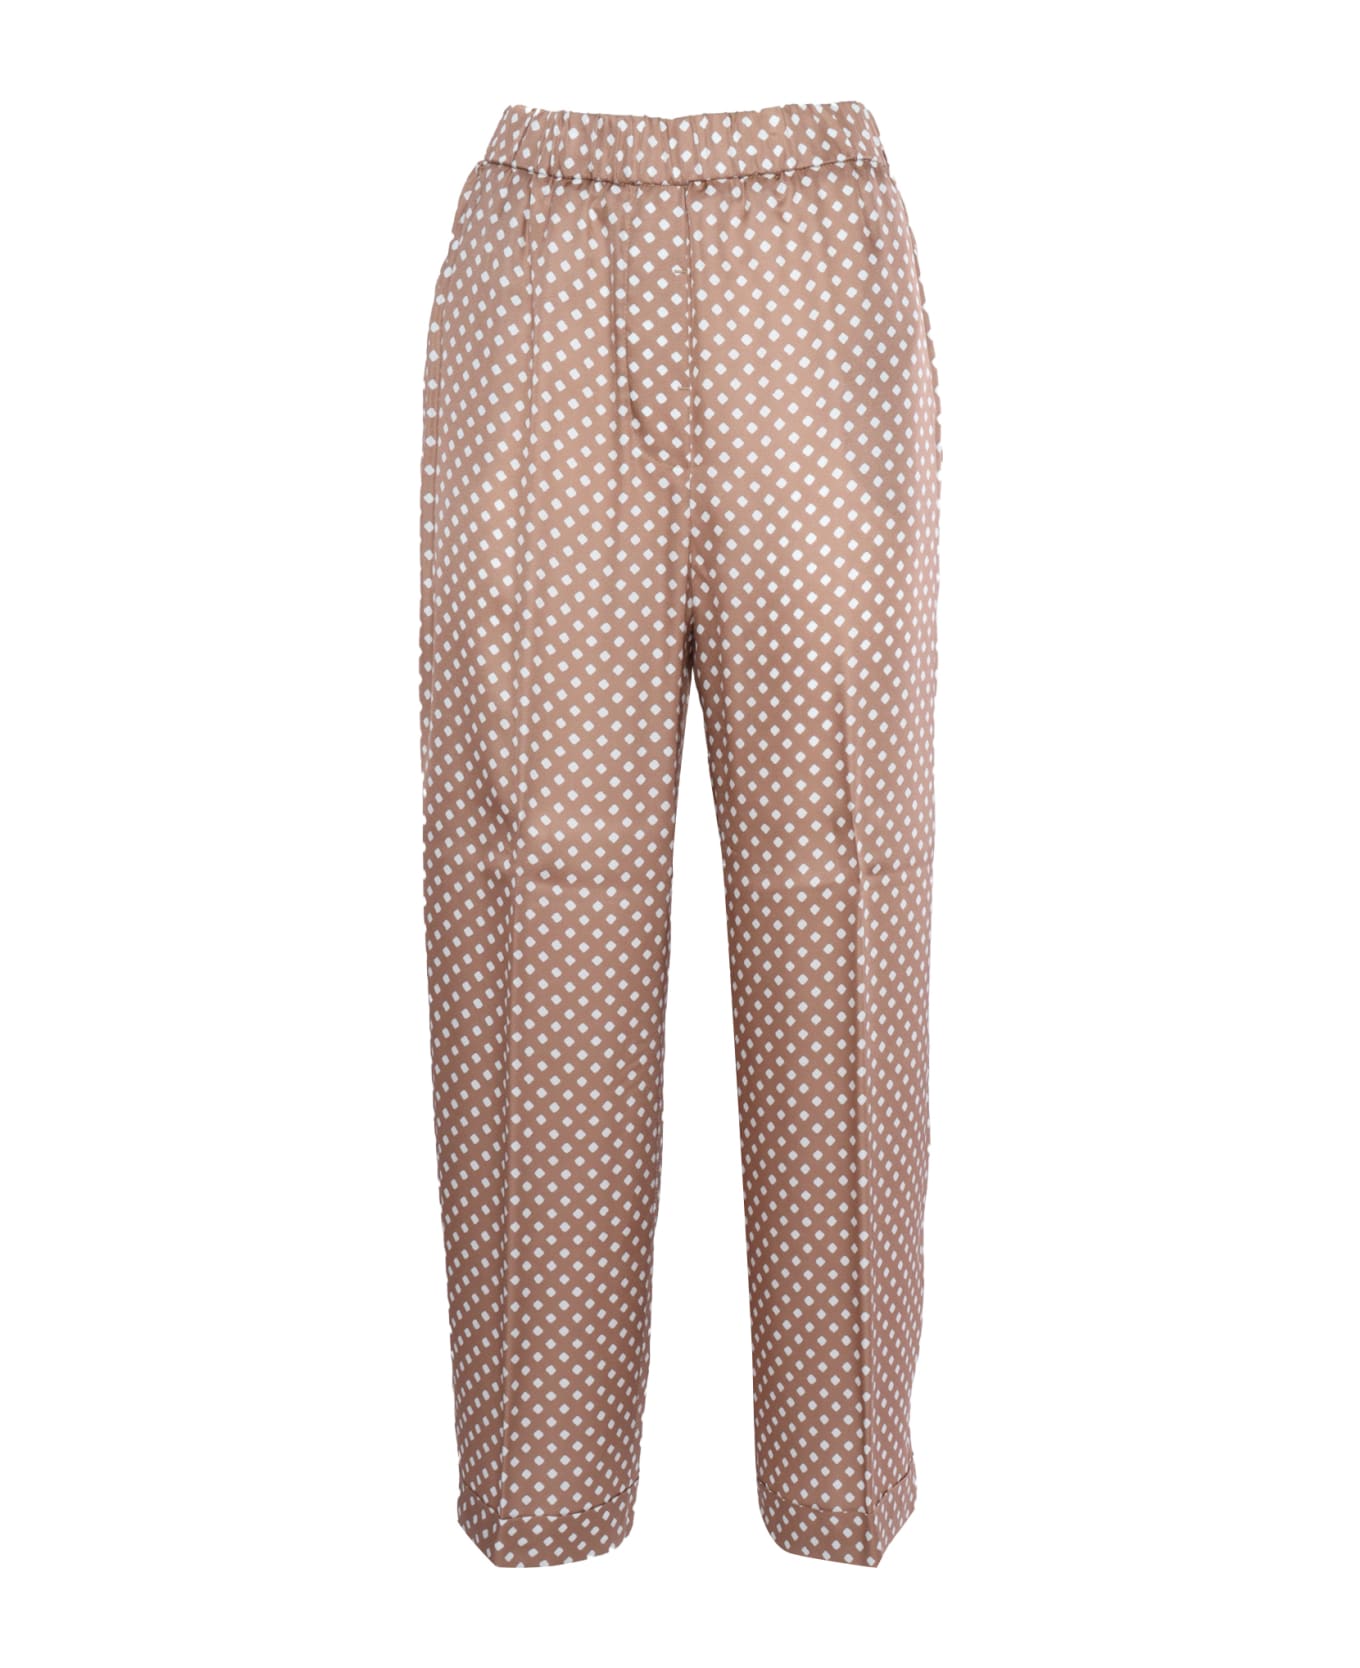 Peserico Brown Trousers With Polka Dots - BROWN